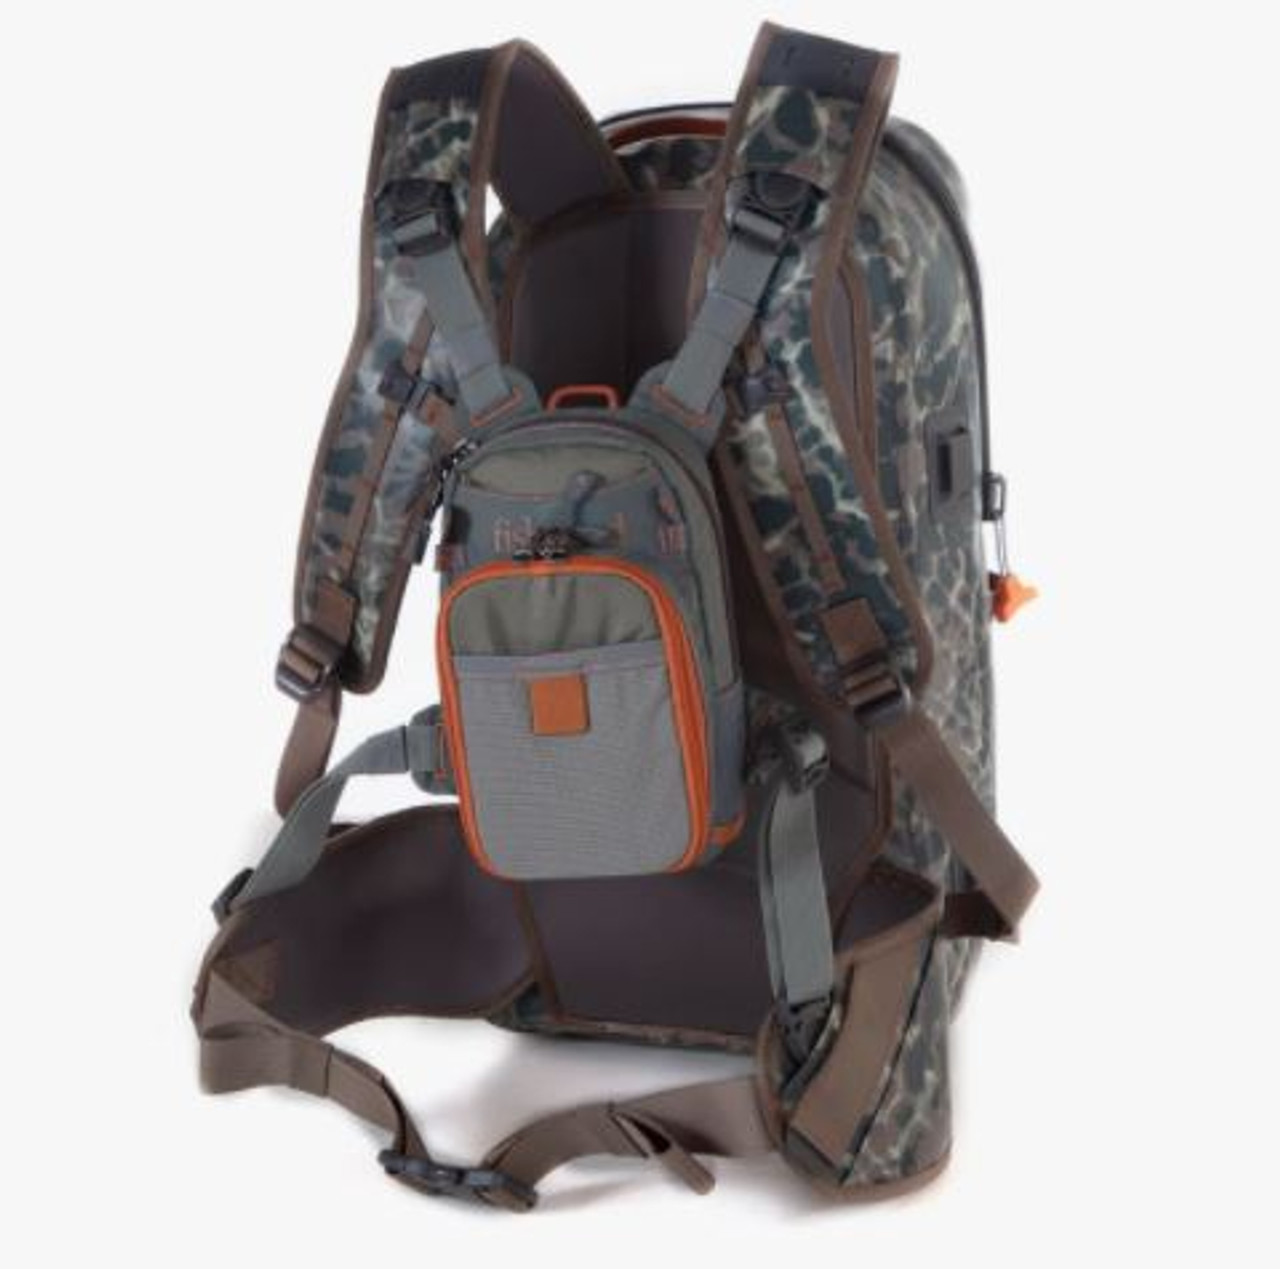 Fishpond — Thunderhead Submersible Backpack - Riverbed Camo